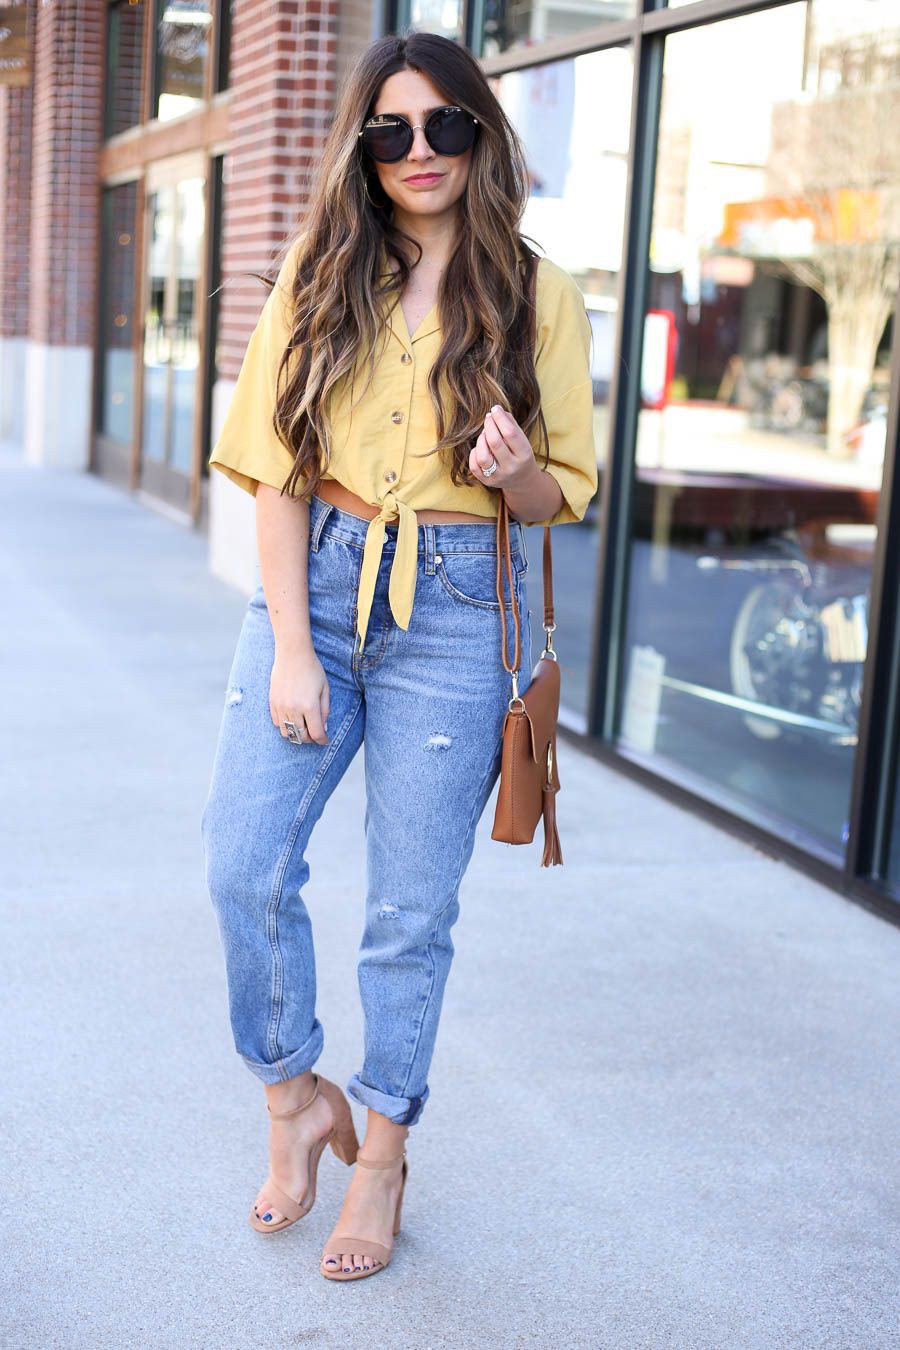 Brunch Outfit Ideas, Casual wear, Mom jeans | Brunch Outfit Ideas | Brunch  Outfit, Casual wear, Mom jeans